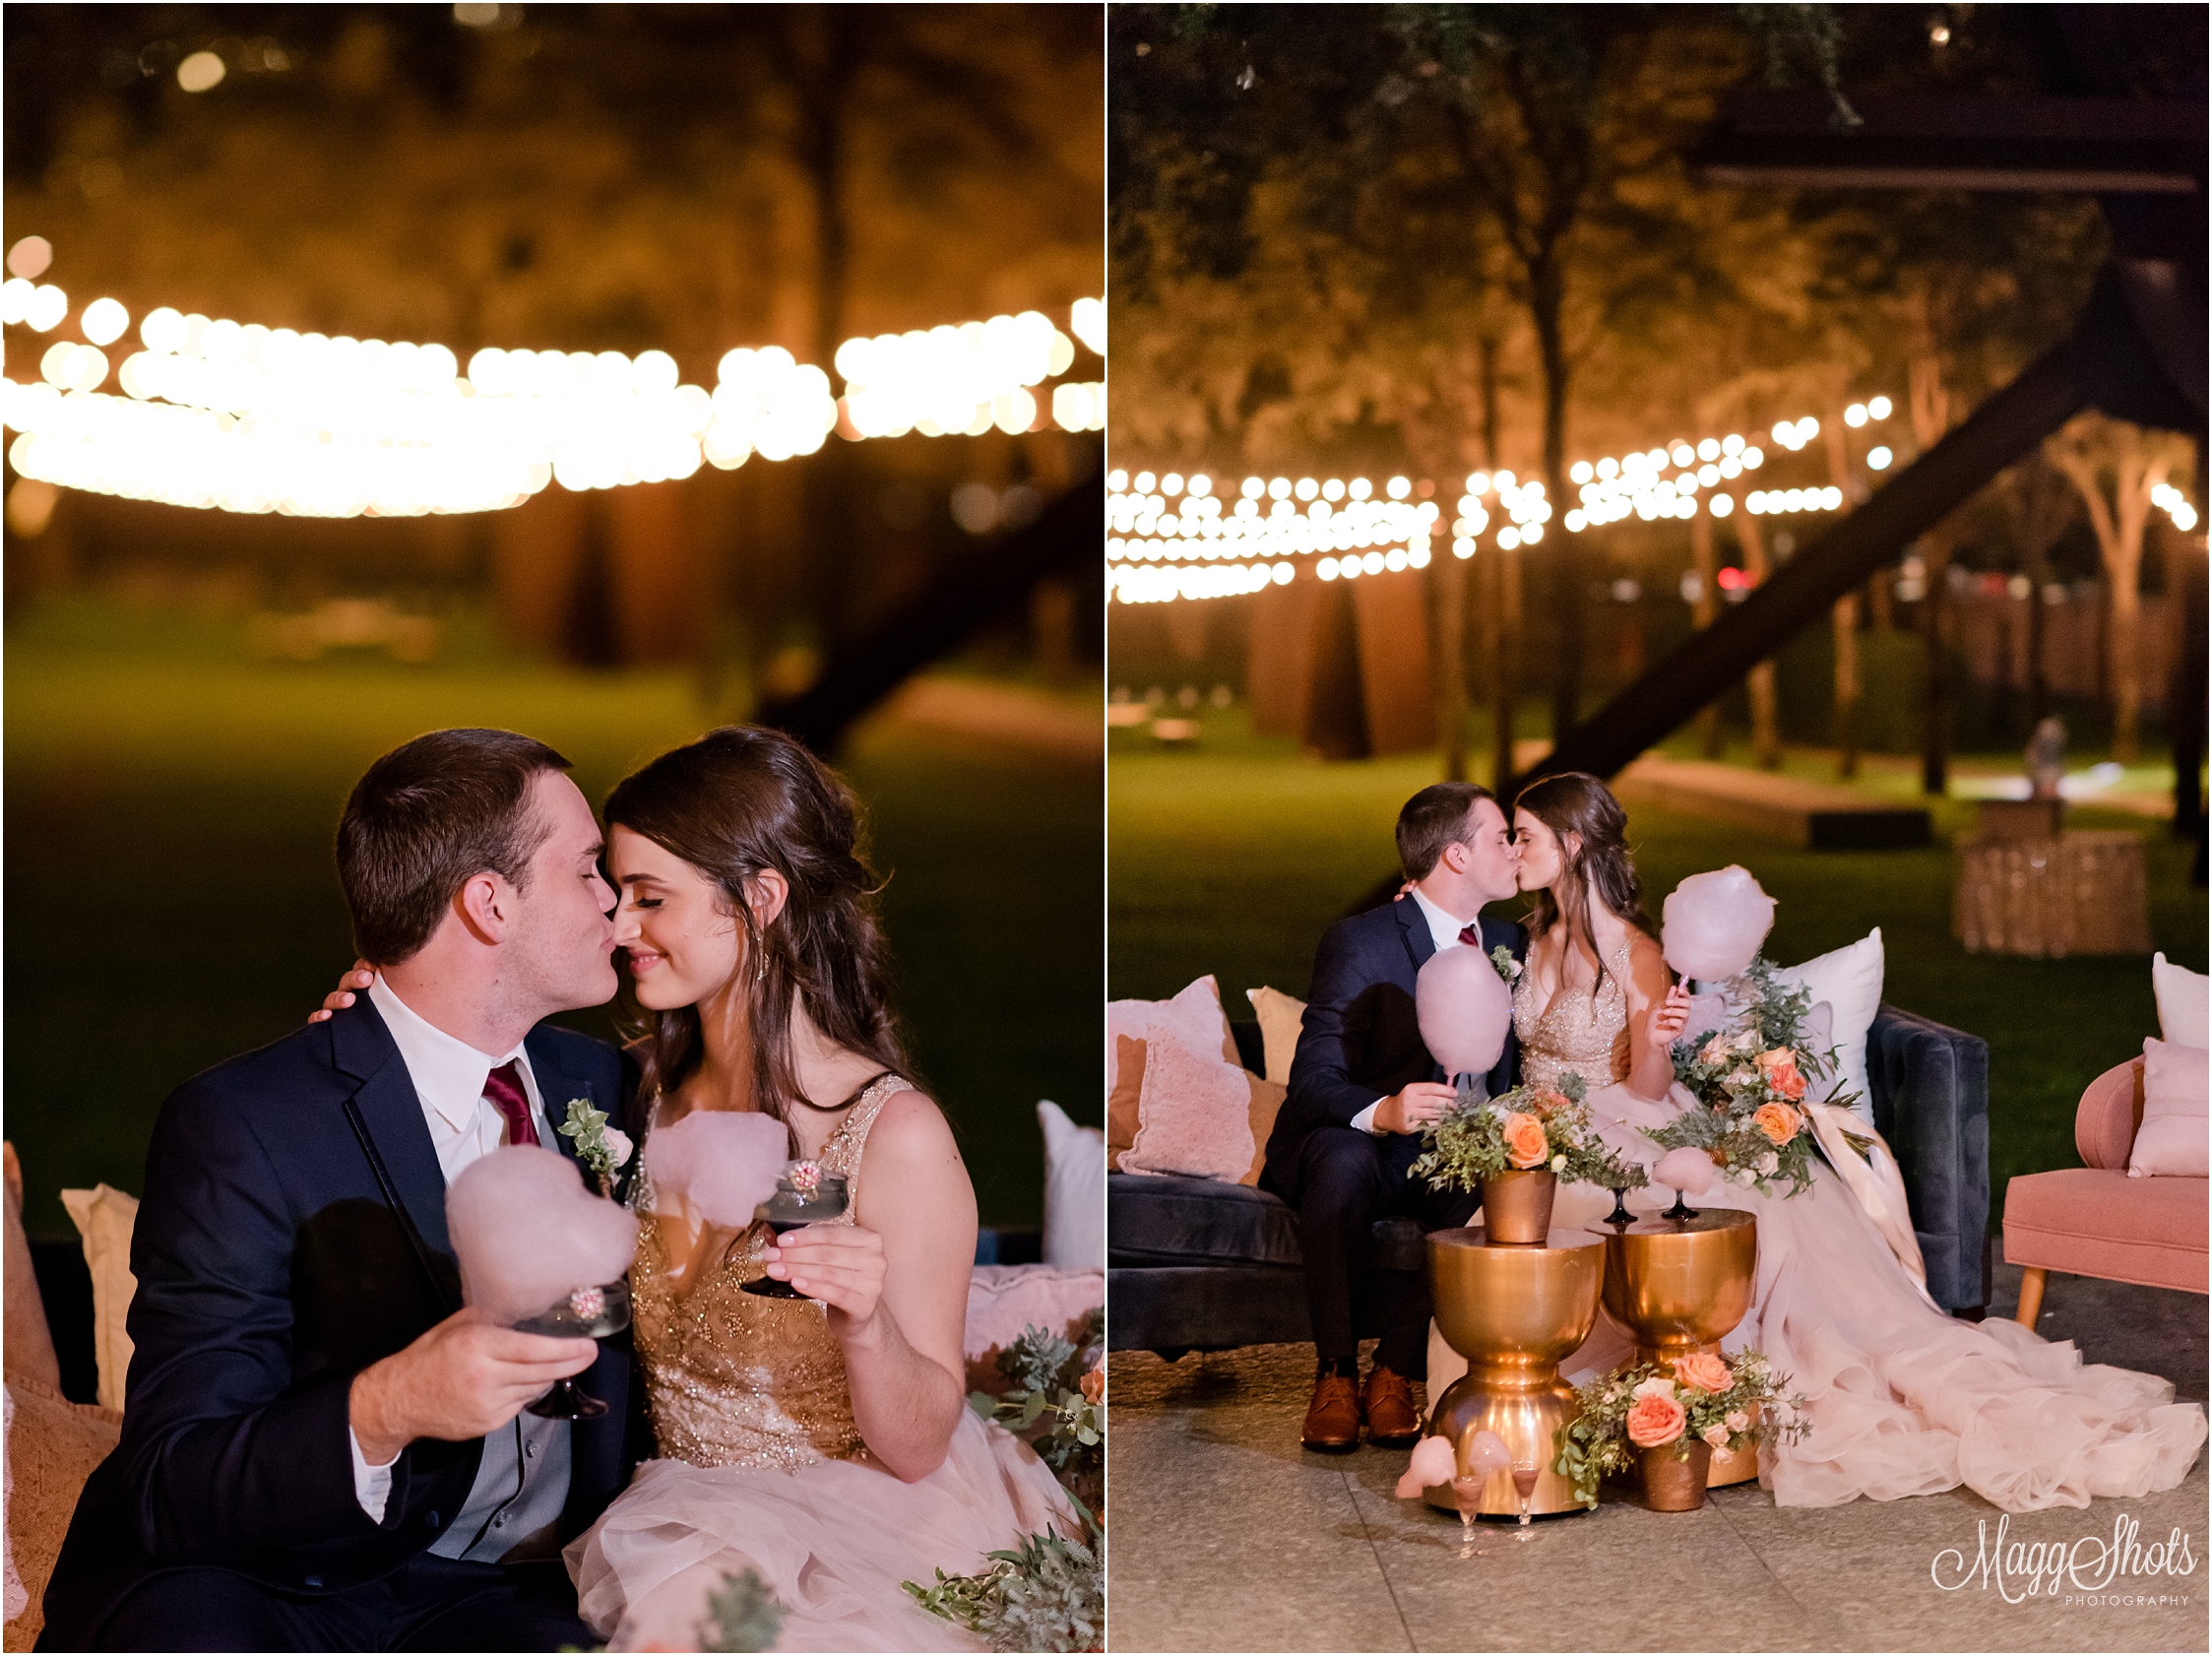 Styled Shoot, Wedding, Love, MaggShots Photography, MaggShots, Professional Photography, Professional Photographer, Couple, Bouquet, Flowers, Ring, The Washer Sculpture Center, Dallas, Bride and Groom, Kiss, Lights, Cotton Candy, Drinks